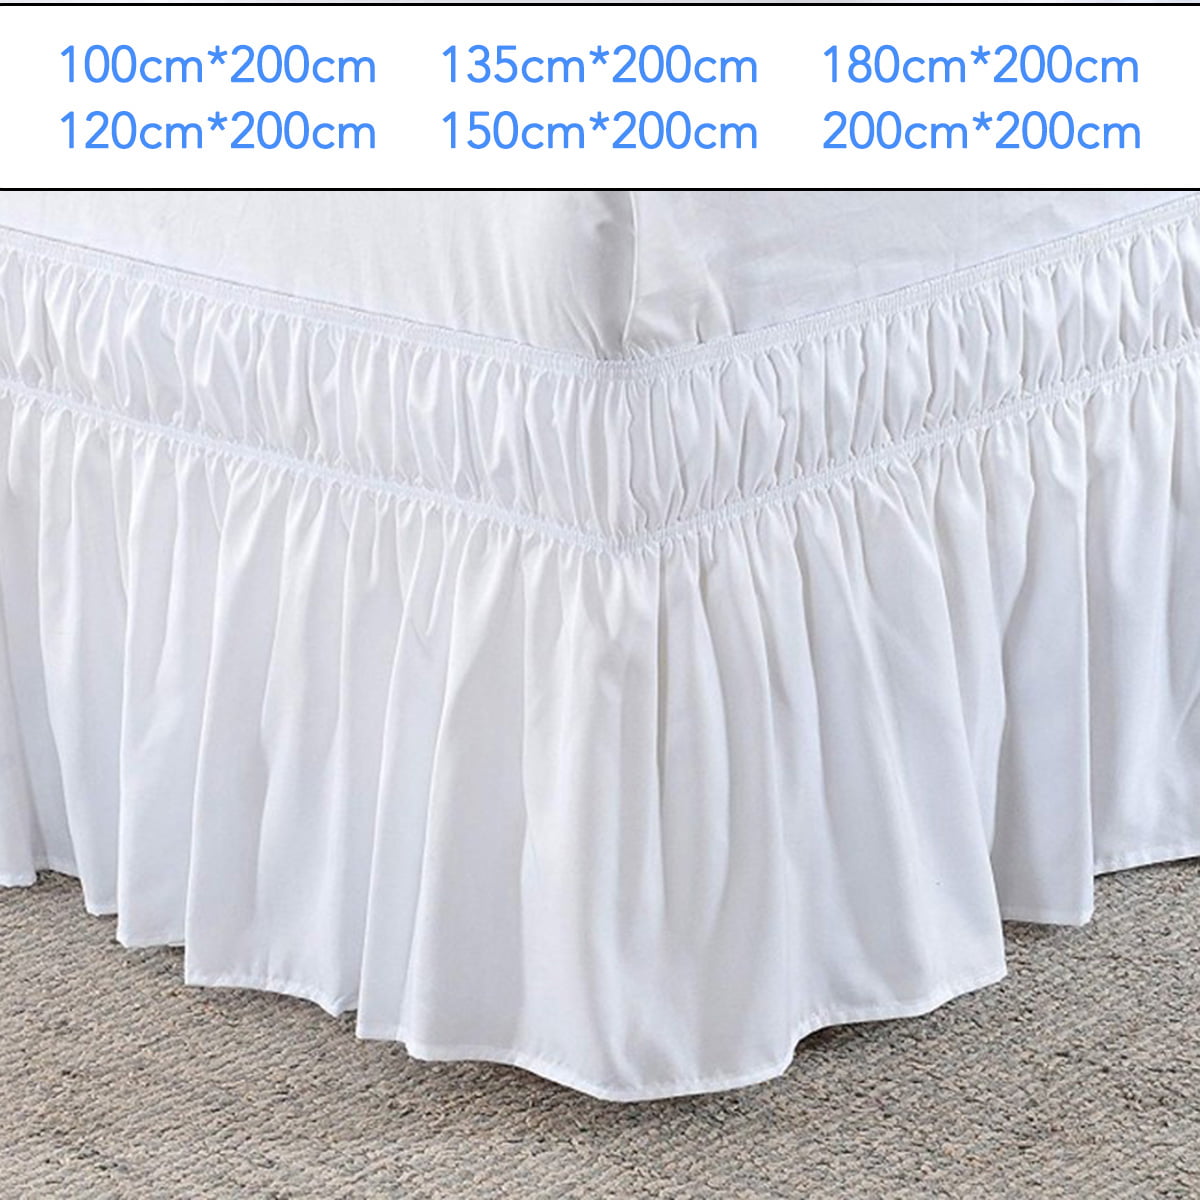 Bed Ruffle Elastic Skirt Fit Wrap Around Twin Full Queen King Valance Bed Decor 